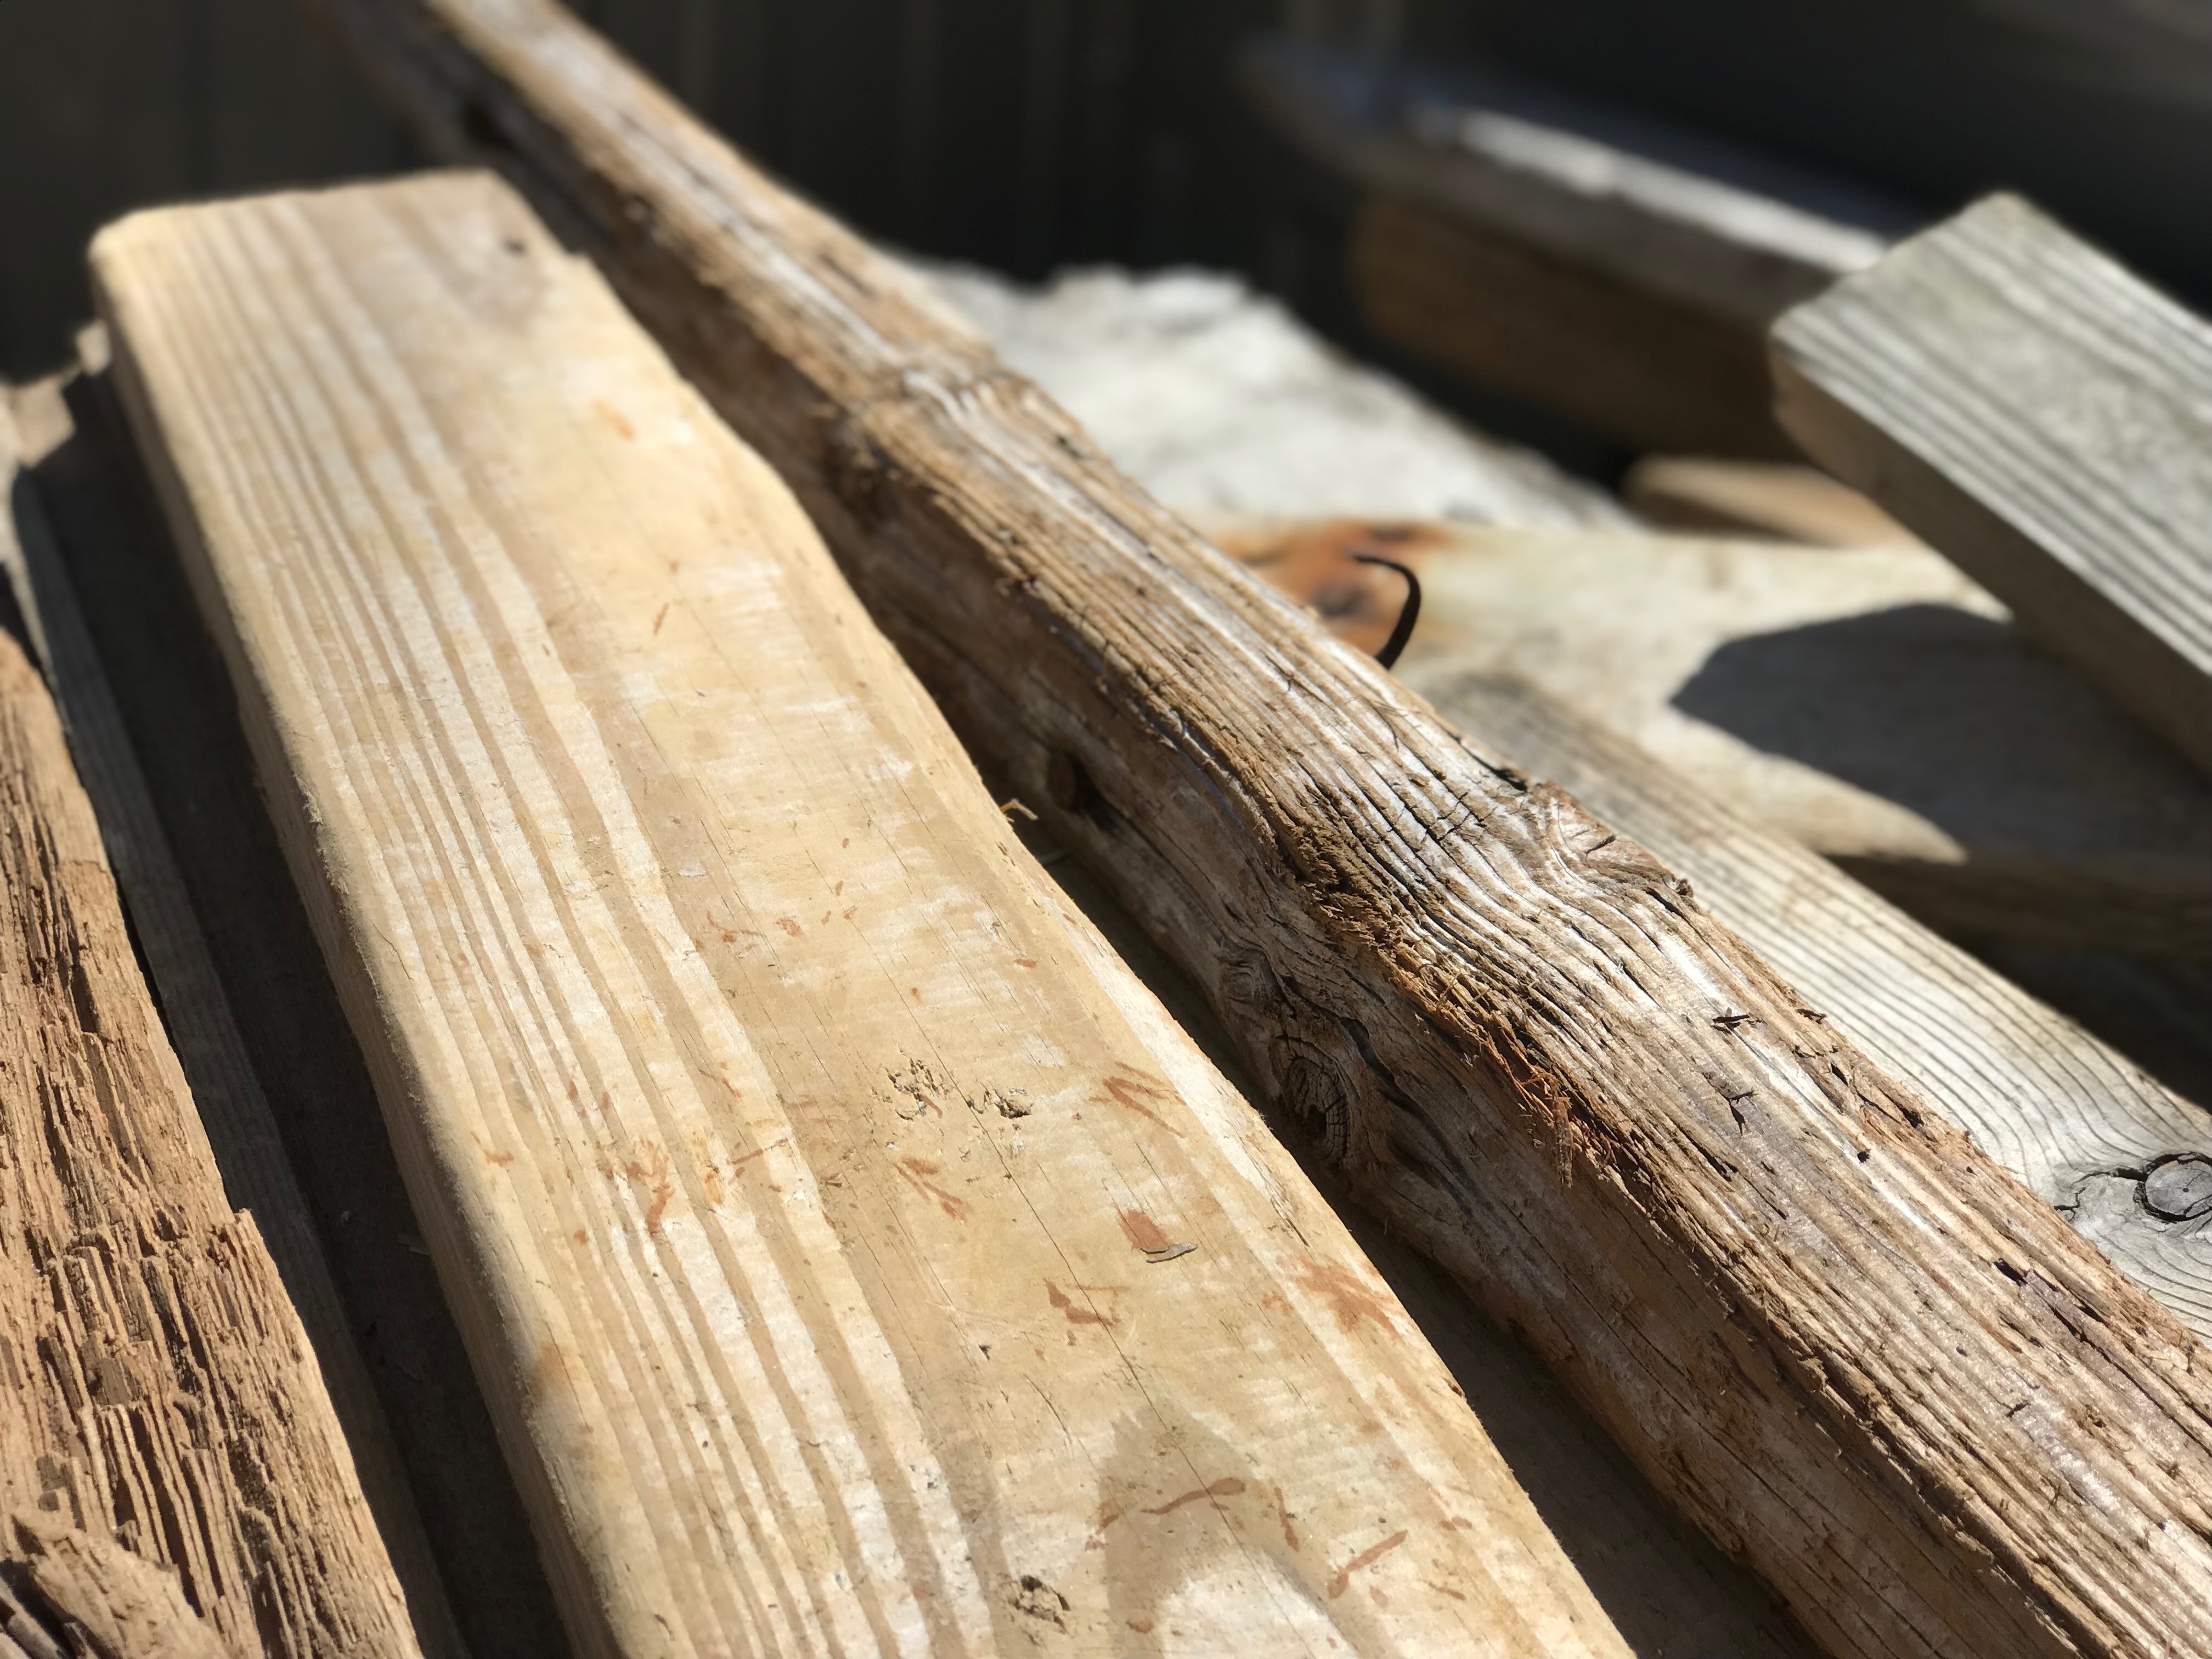 DIY Driftwood- How to Distress Driftwood Boards